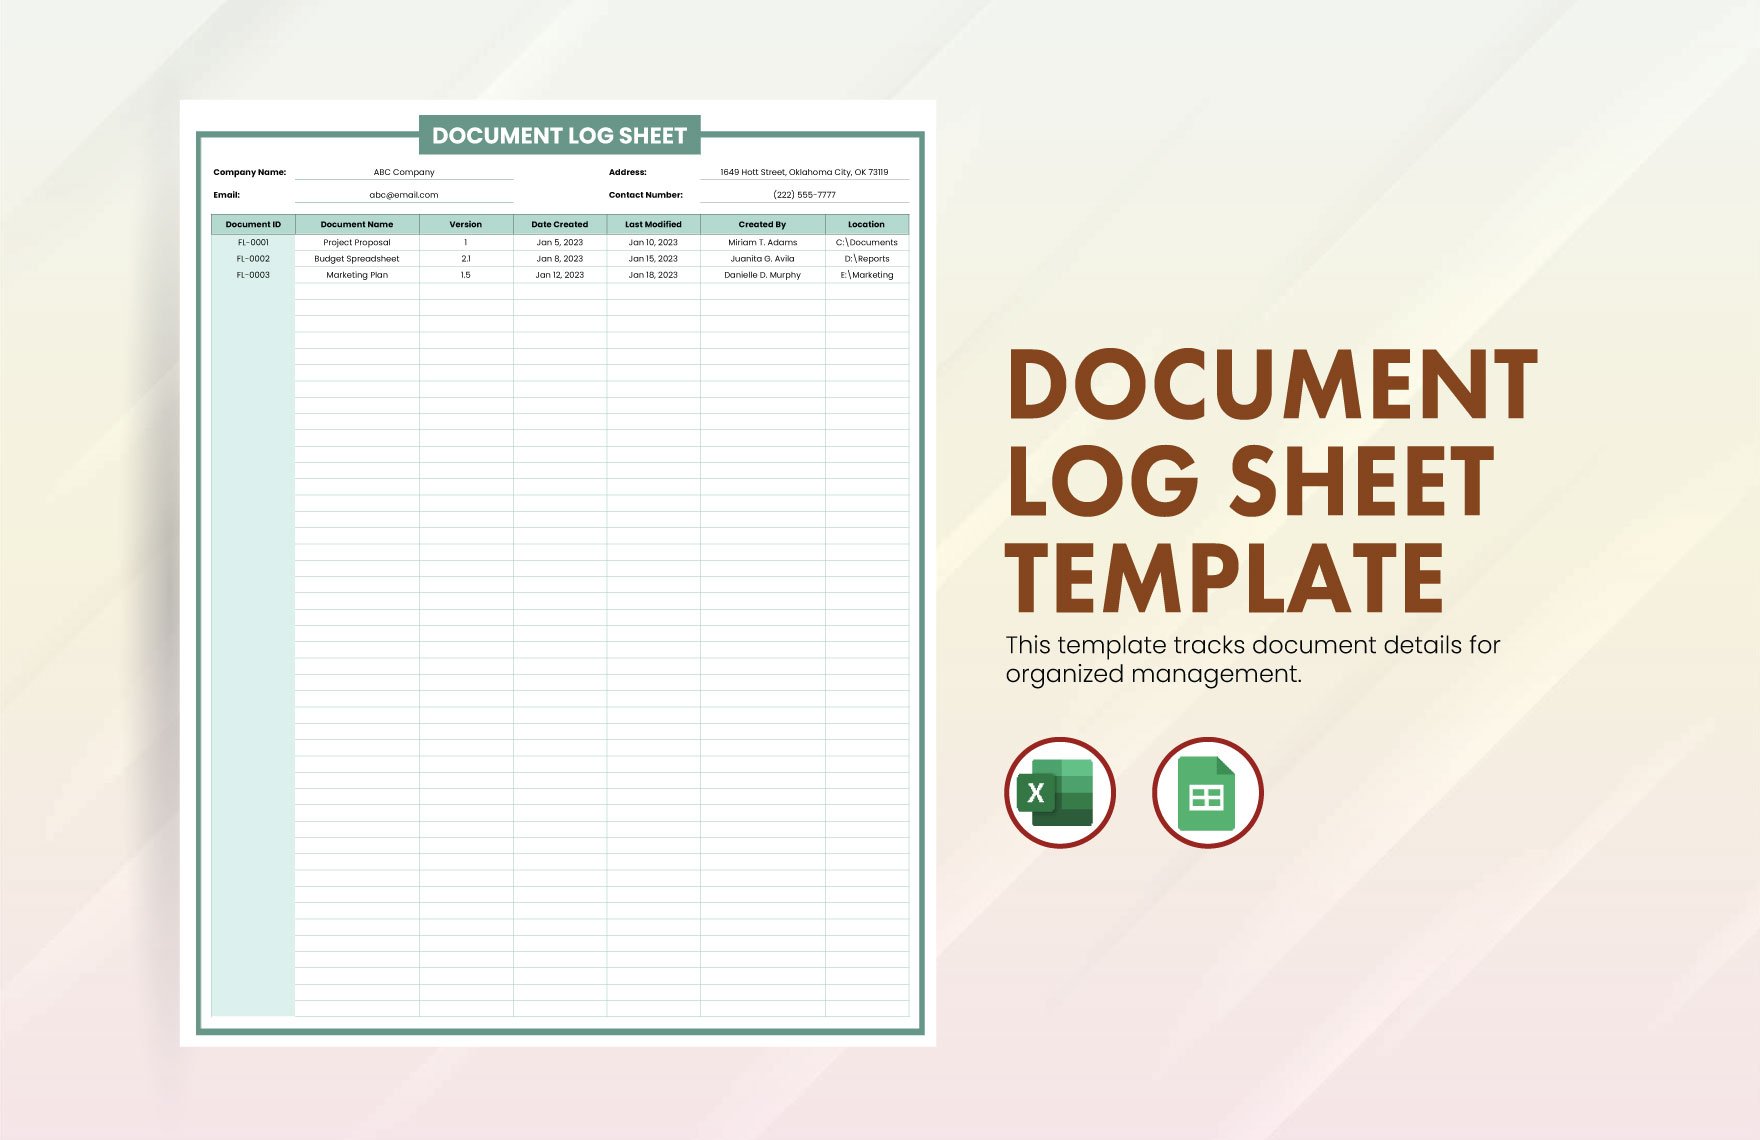 Document Log Sheet Template in Excel, Google Sheets